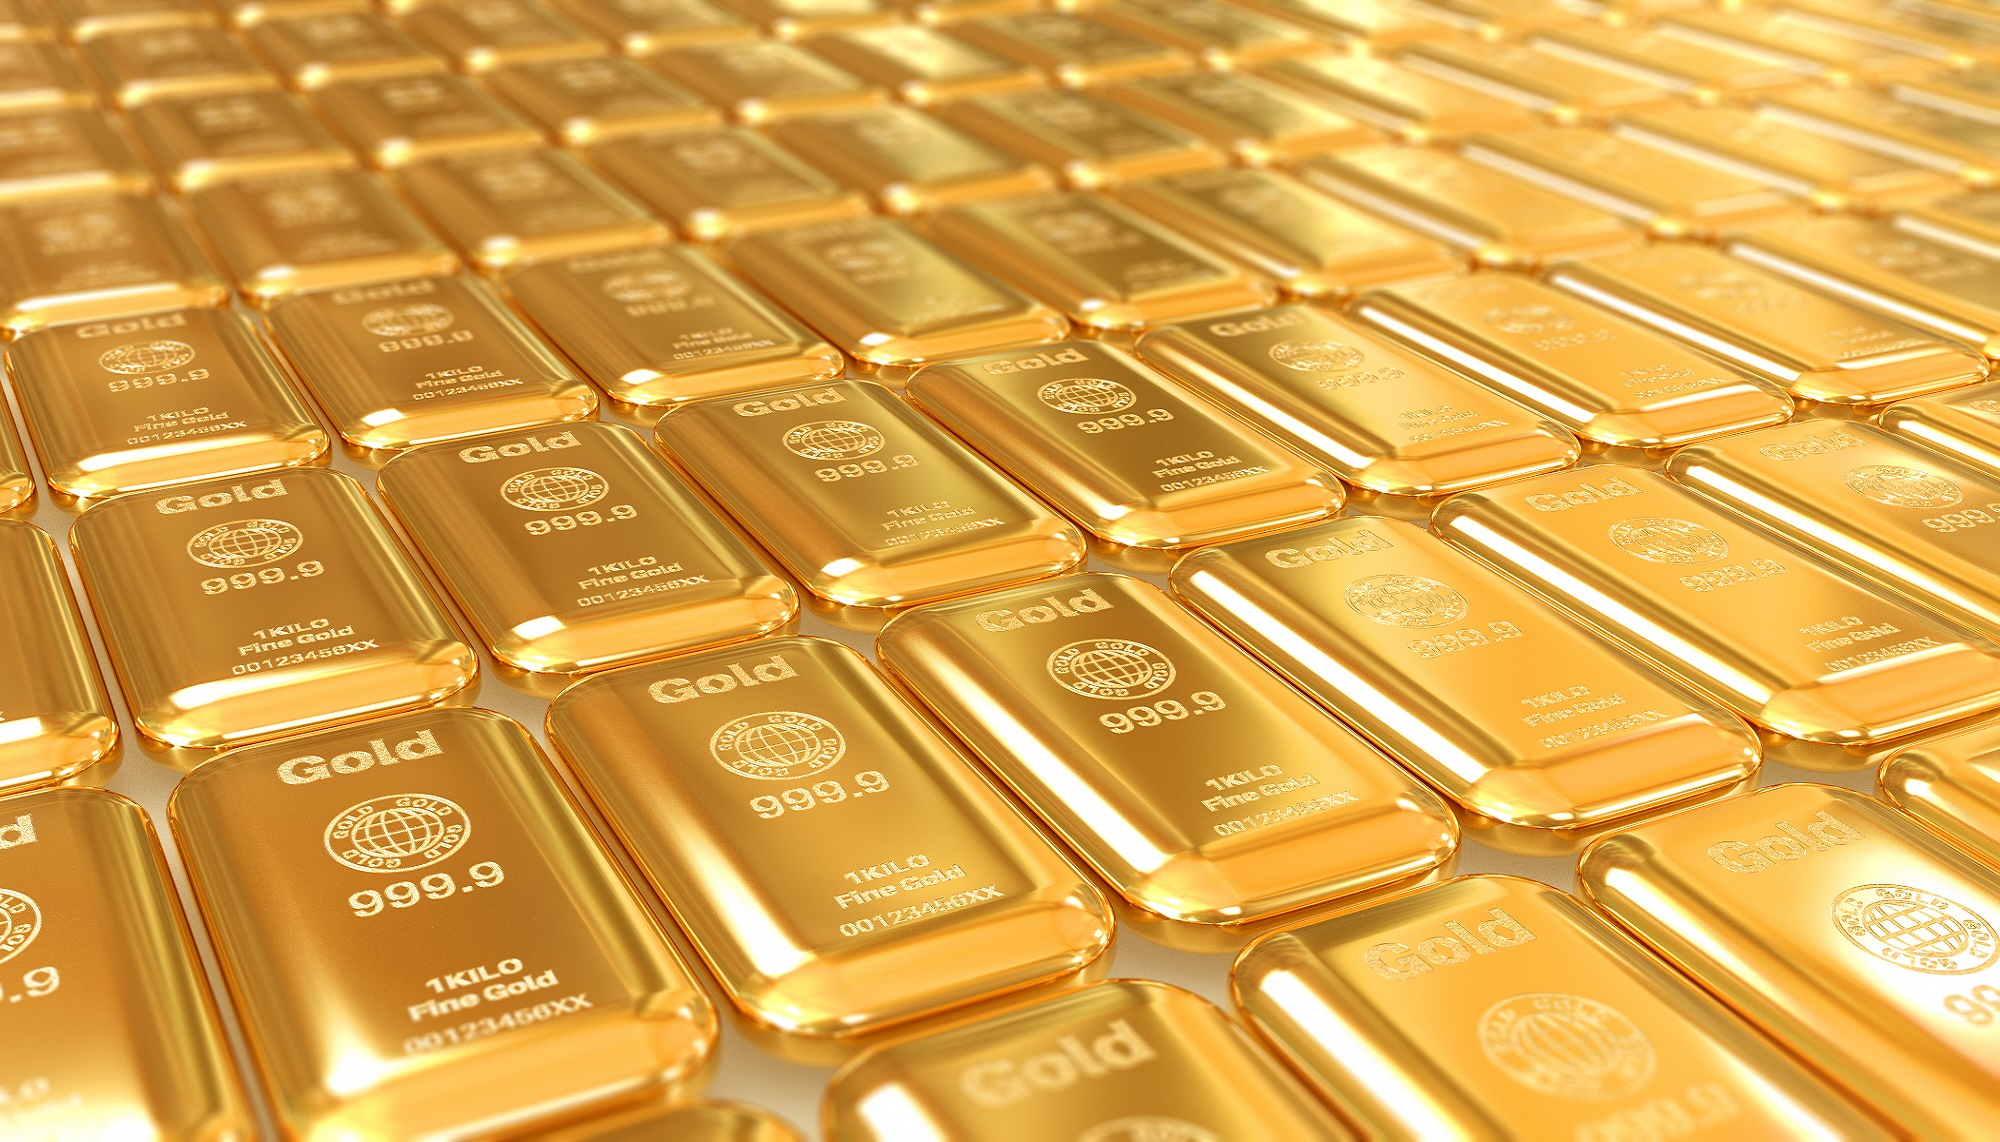 Central bank gold buying picks up in April